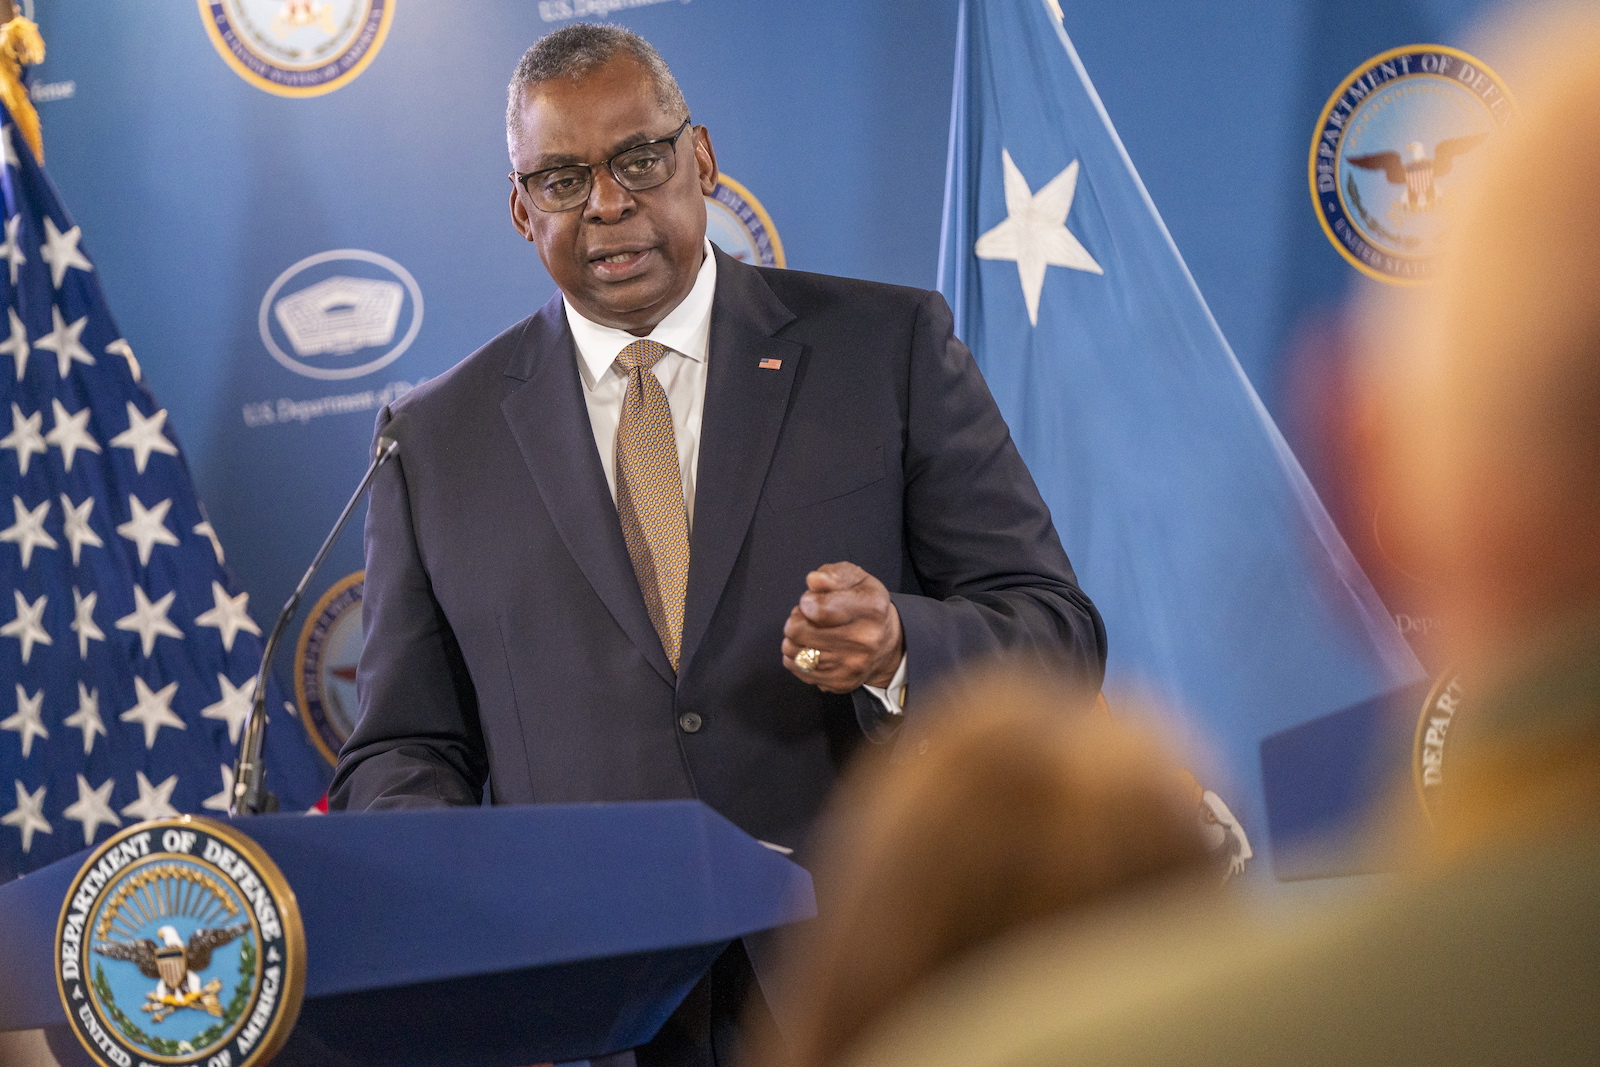 epa10653691 US Secretary of Defense Lloyd Austin responds to a question from the news media during a press conference at the Pentagon in Arlington, Virginia, USA, 25 May 2023. The press conference followed the virtual 12th meeting of the Ukraine Defense Contact Group with ministers of defense and chiefs of defense from nearly 50 nations discussing Russia's ongoing war in Ukraine and continued coordination for Ukraine's sovereignty.  EPA/SHAWN THEW